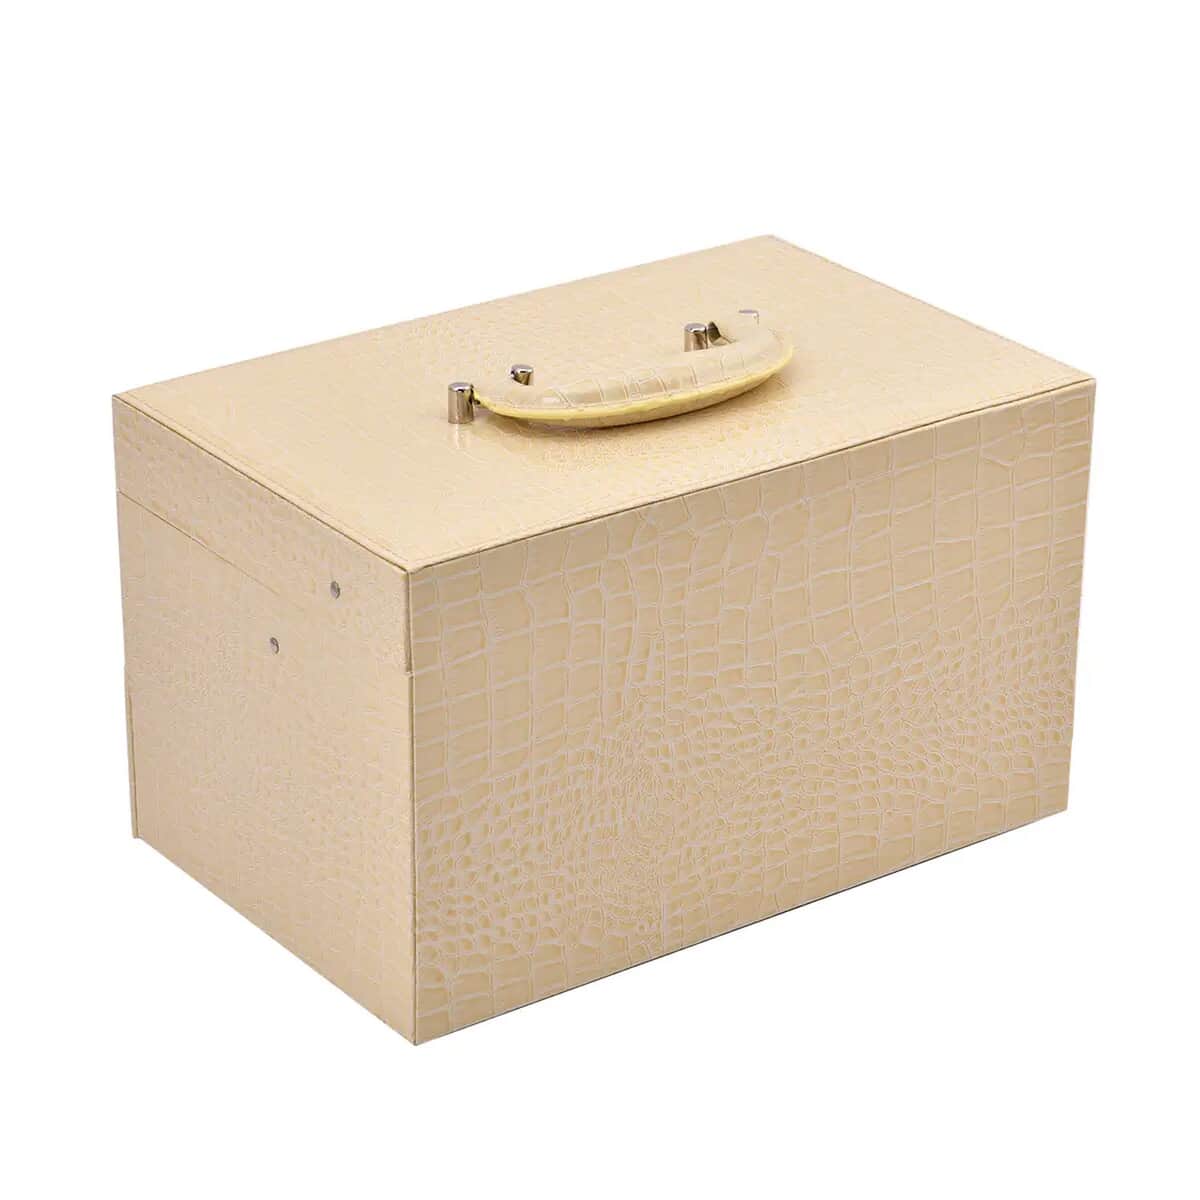 Cream Crocodile Embossed Faux Leather Convertible Jewelry Box with Padlock, Jewelry Storage Box for Women, Jewelry Case, Jewelry Organizer image number 6